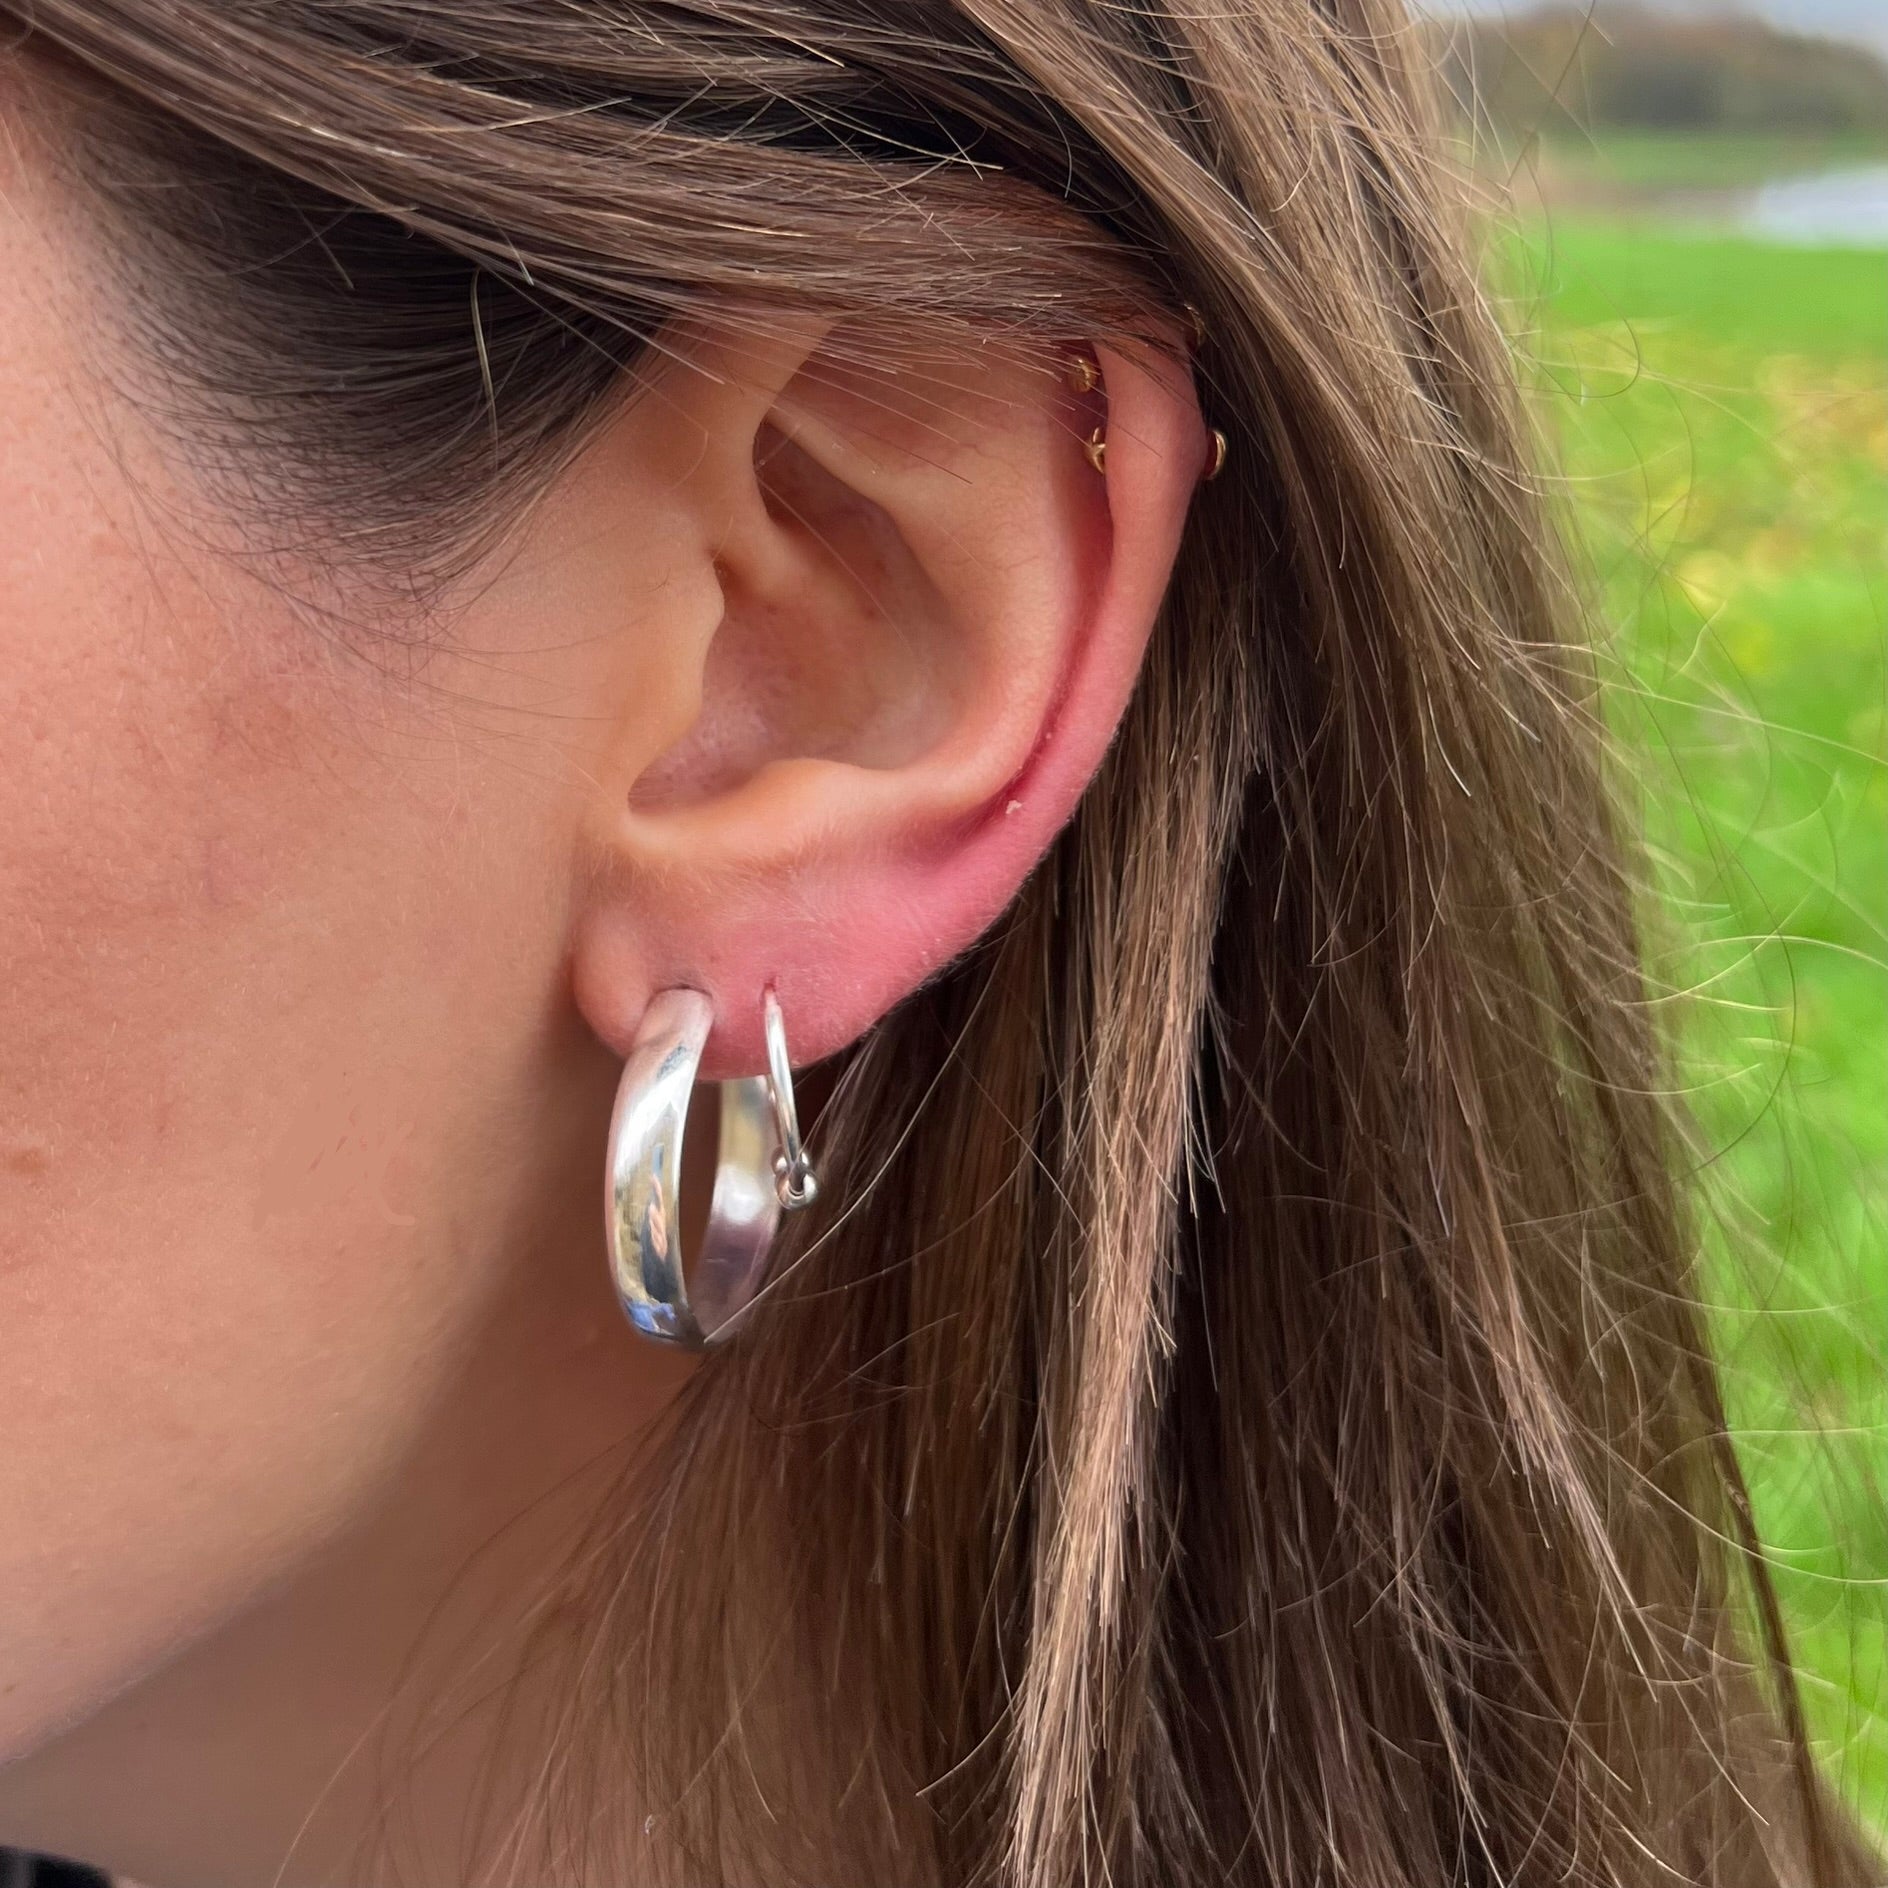 A pair of shiny sterling silver hoop earrings pictured on a models ear.